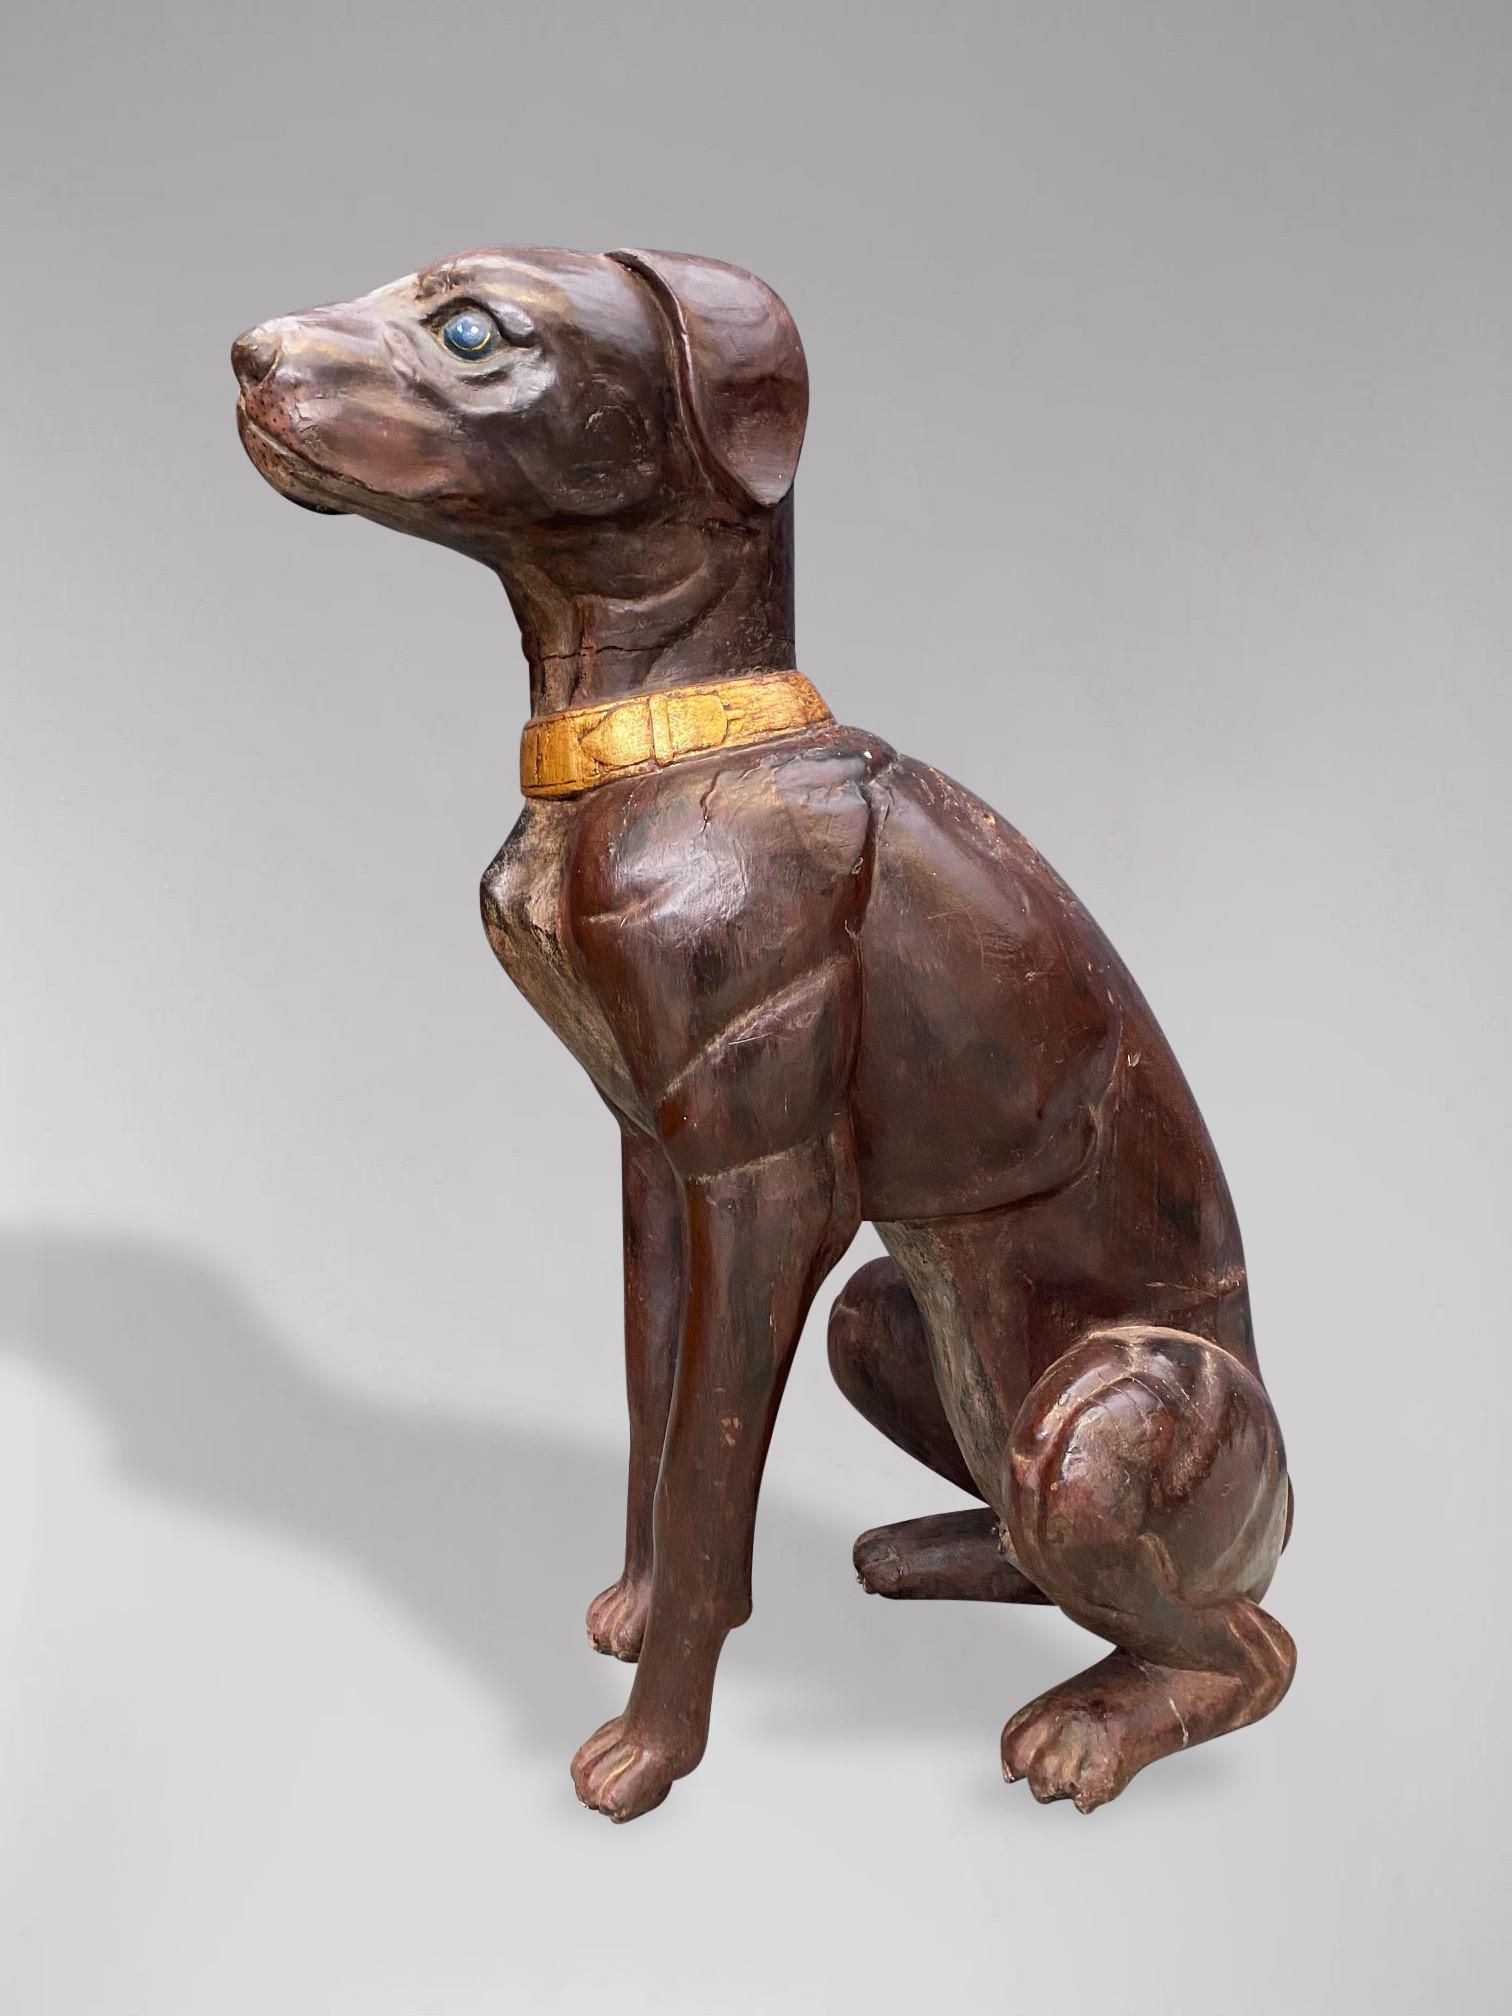 A late 19th century high quality life size leather dog statue with painted eyes and a gilded collar. Great colour and patina throughout. Free delivery for the United Kingdom and the rest of the world.

The dimensions are:
Height: 71cm